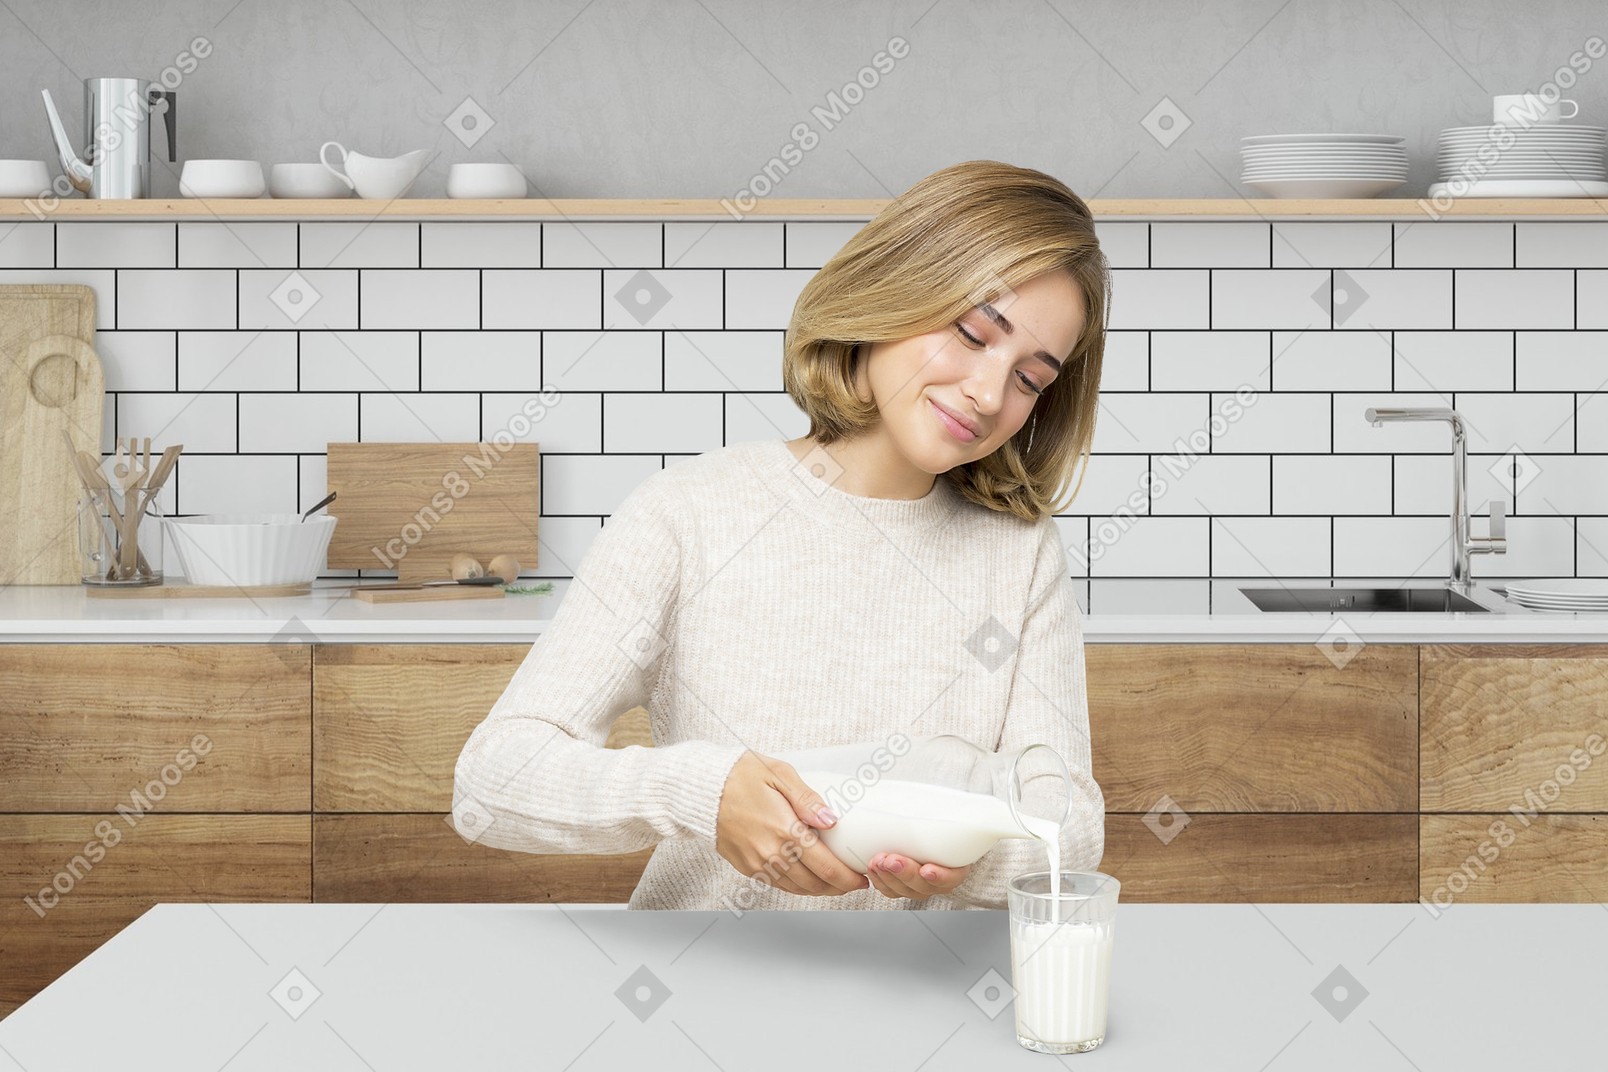 A woman sitting at a table with a glass of milk